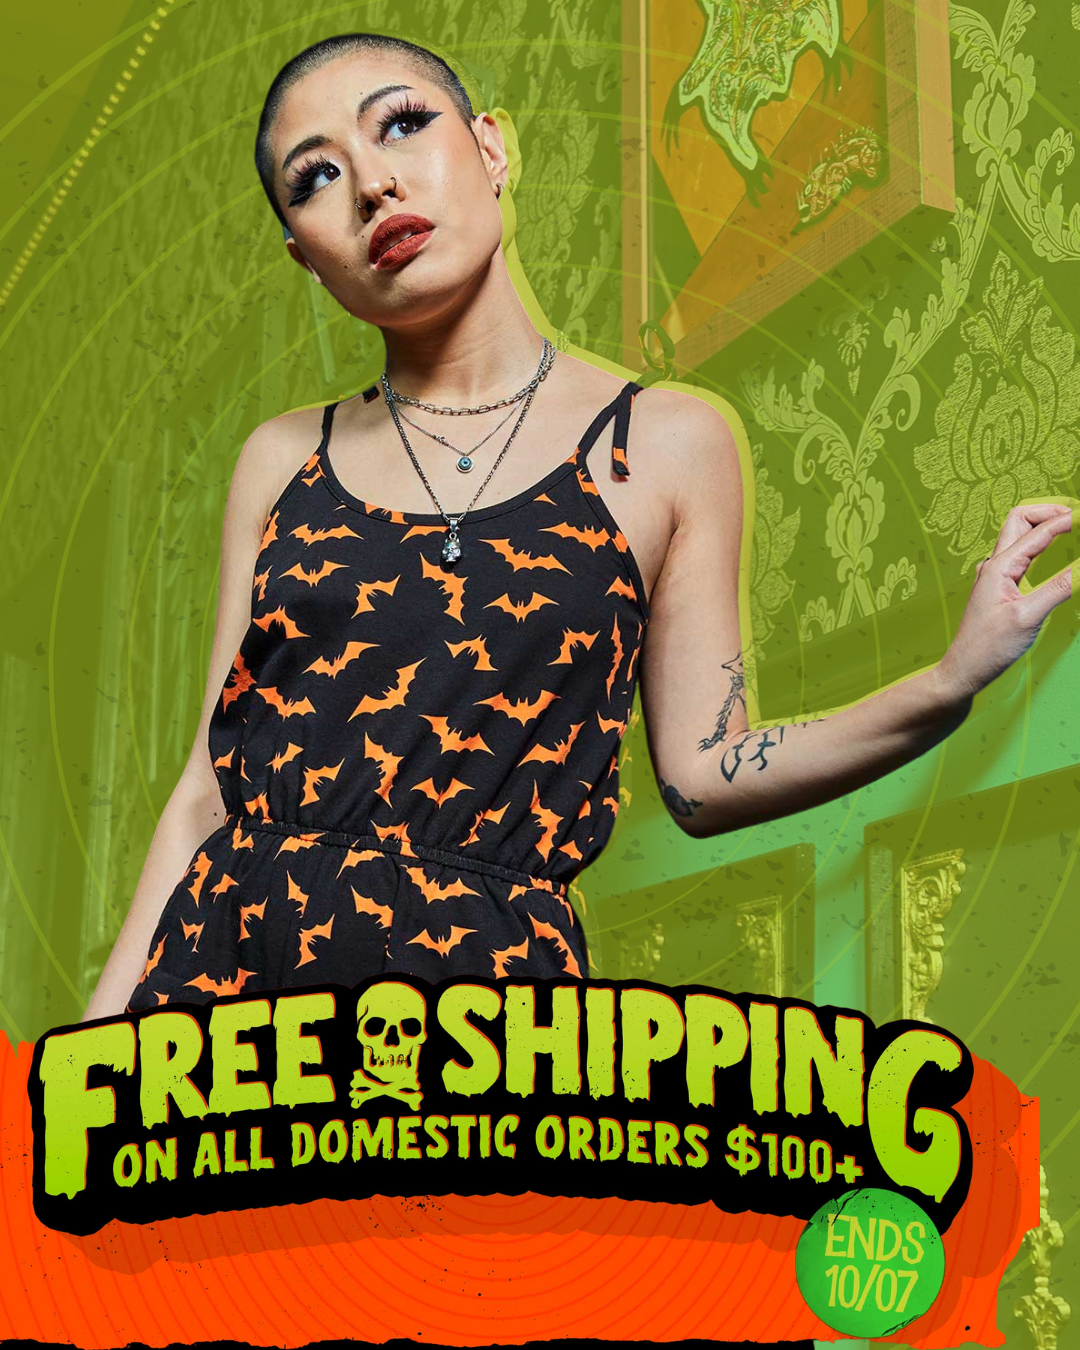 FREE SHIPPING IS HERE!